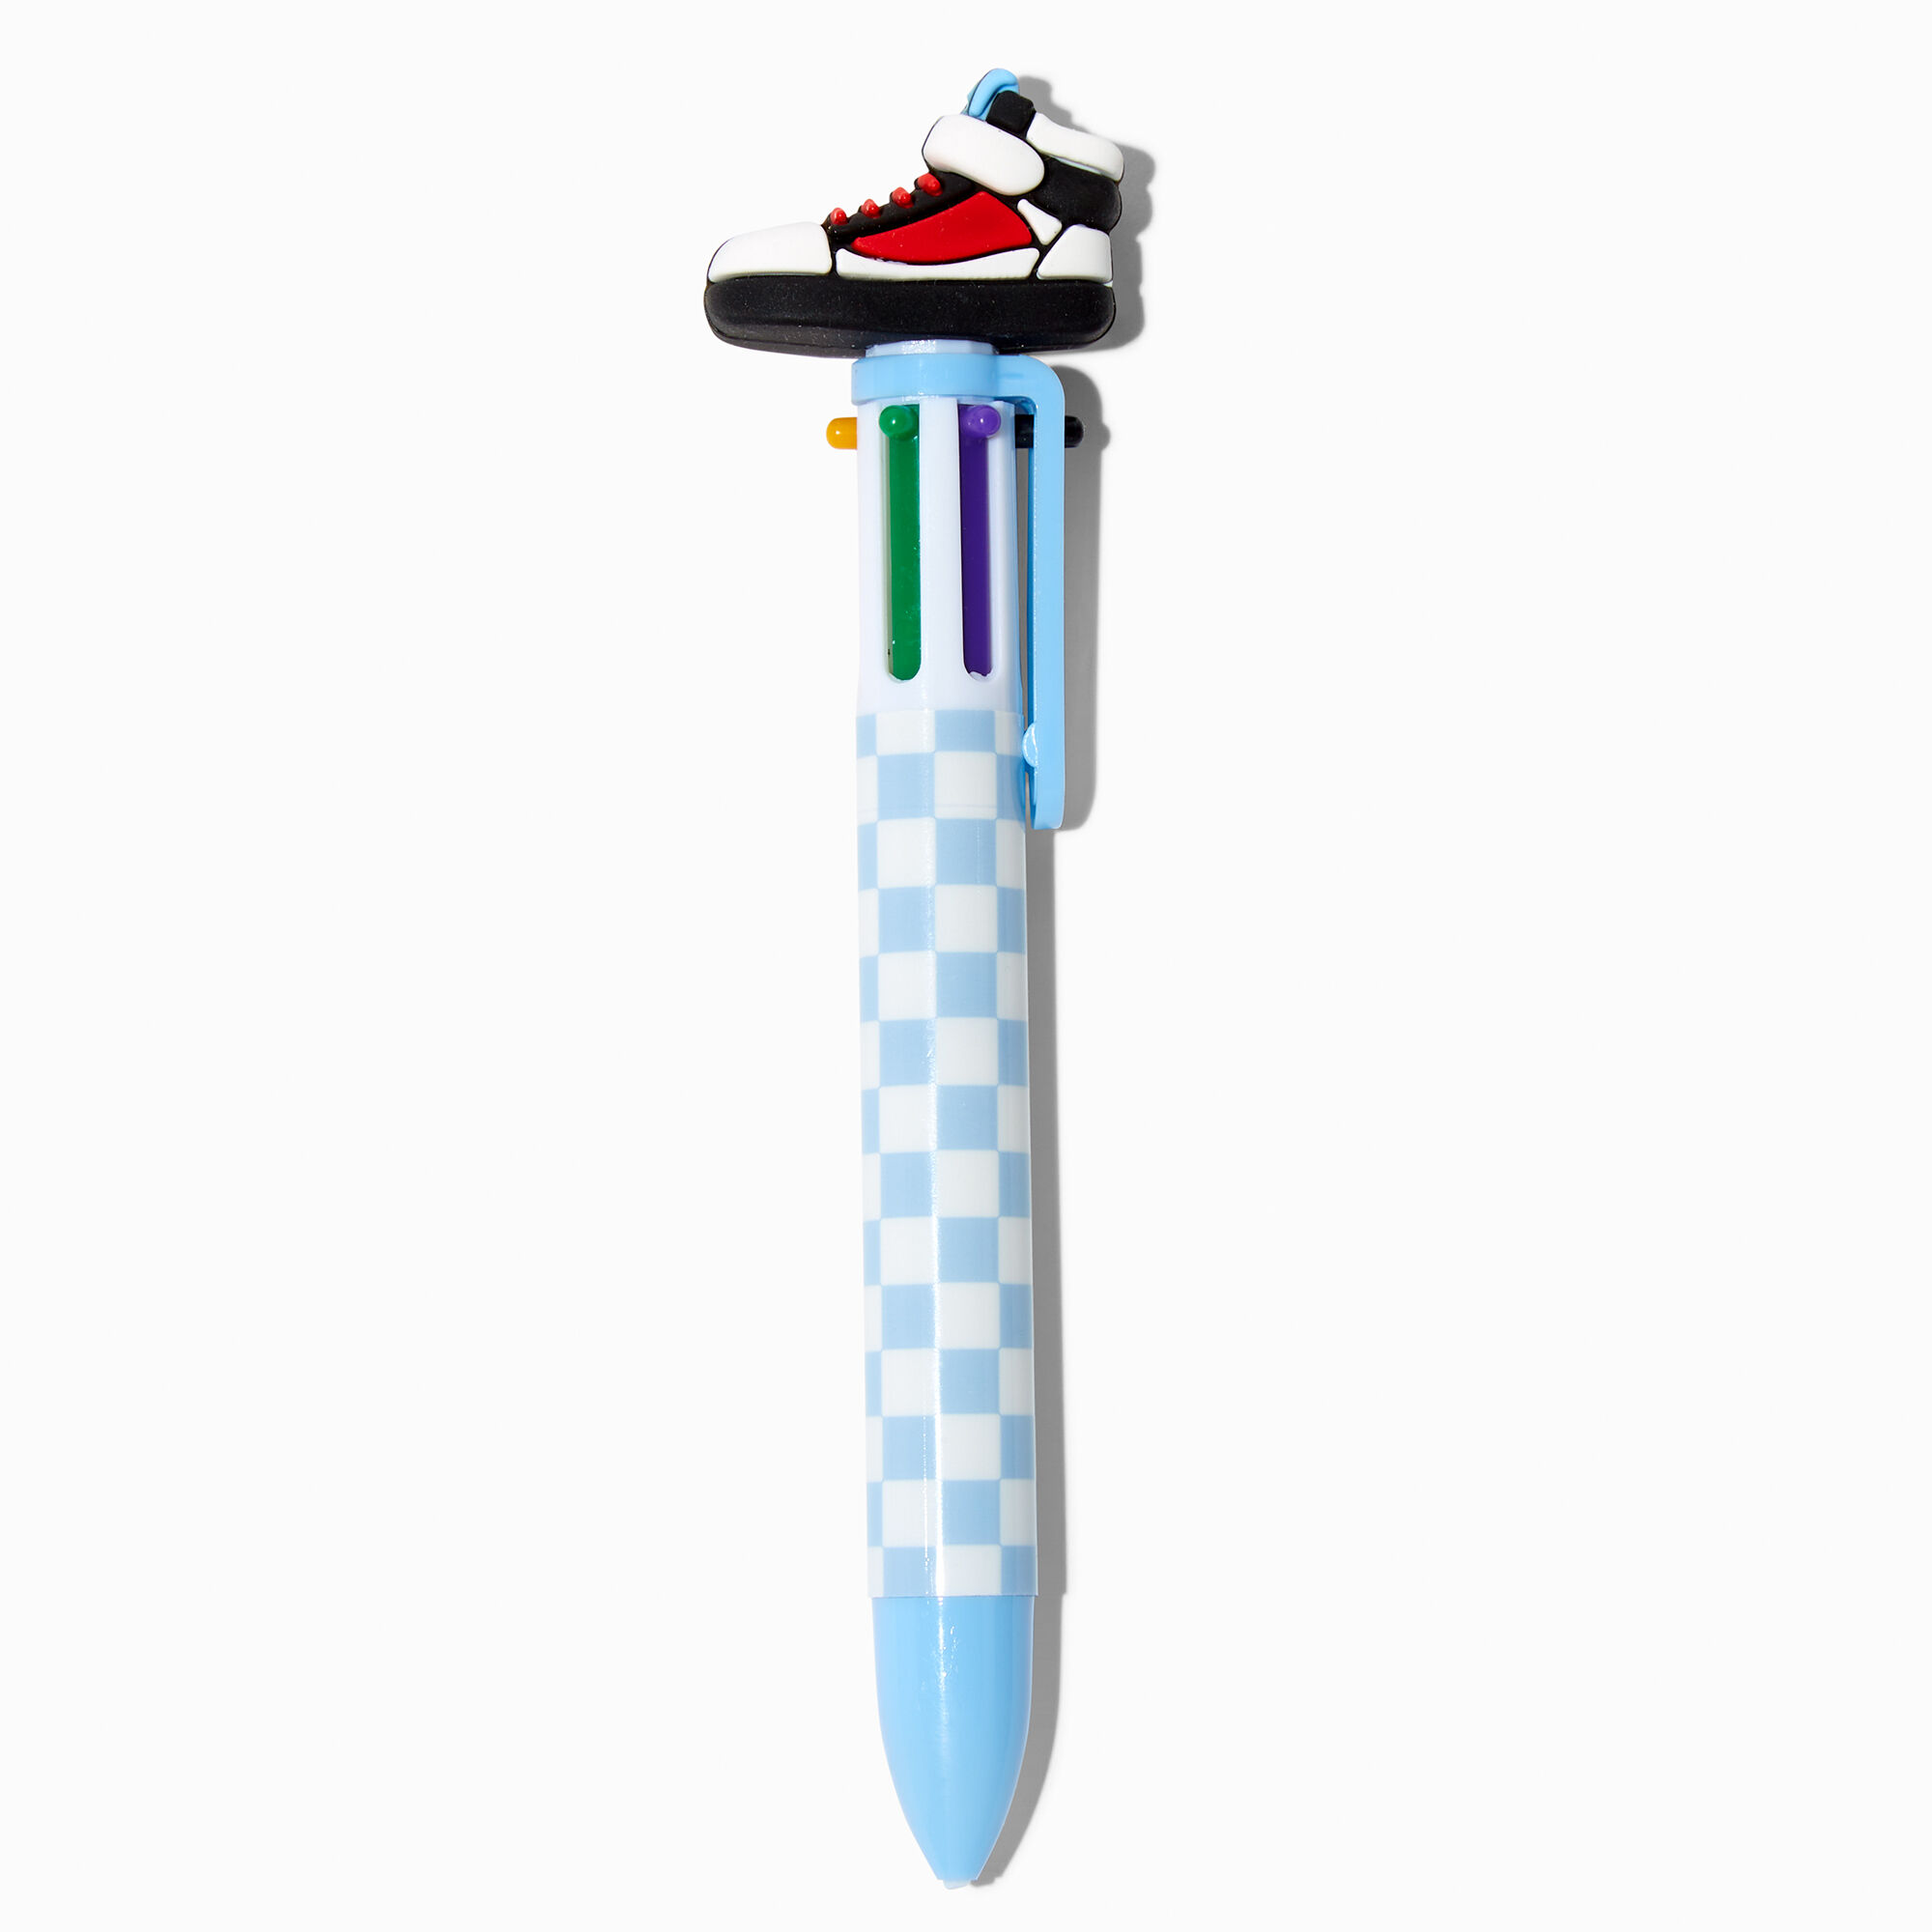 View Claires Sneaker colored Pen information